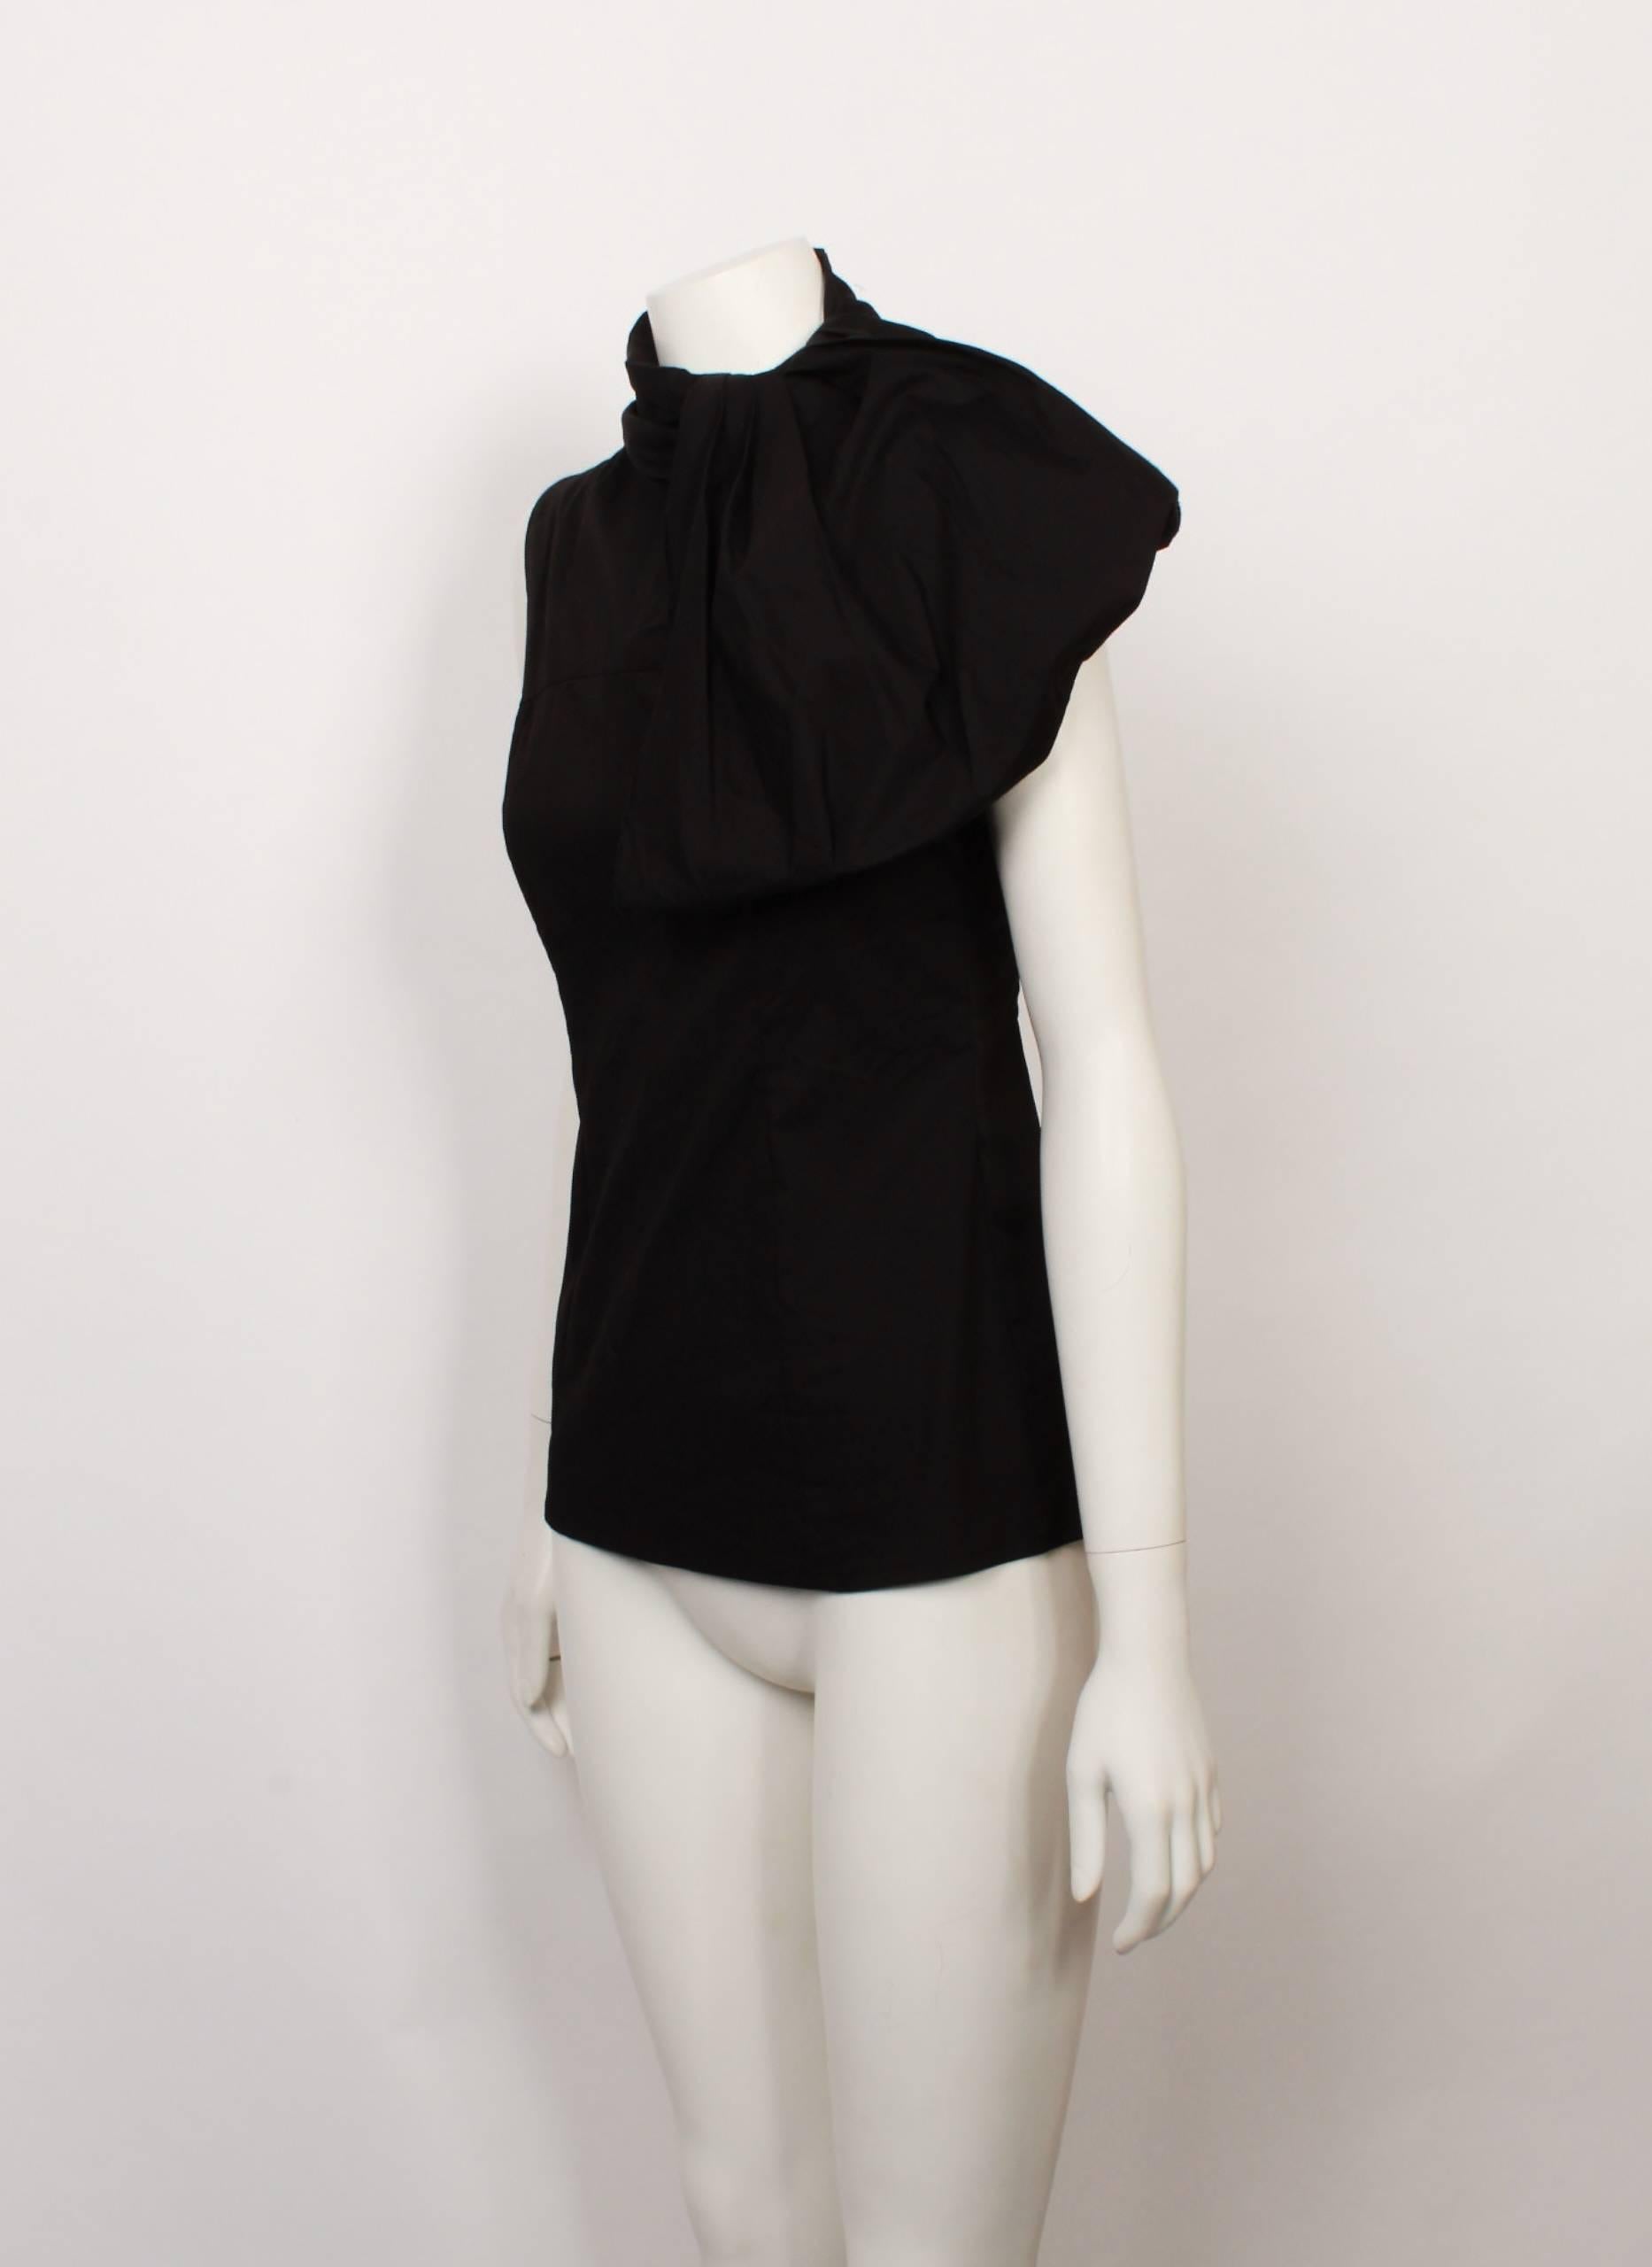 Prada black cotton sleeveless shell top with exaggerated side cravat. Fitted silhouette and back invisible zipper. Made in Italy. size 40. Fabric has slight stretch.
